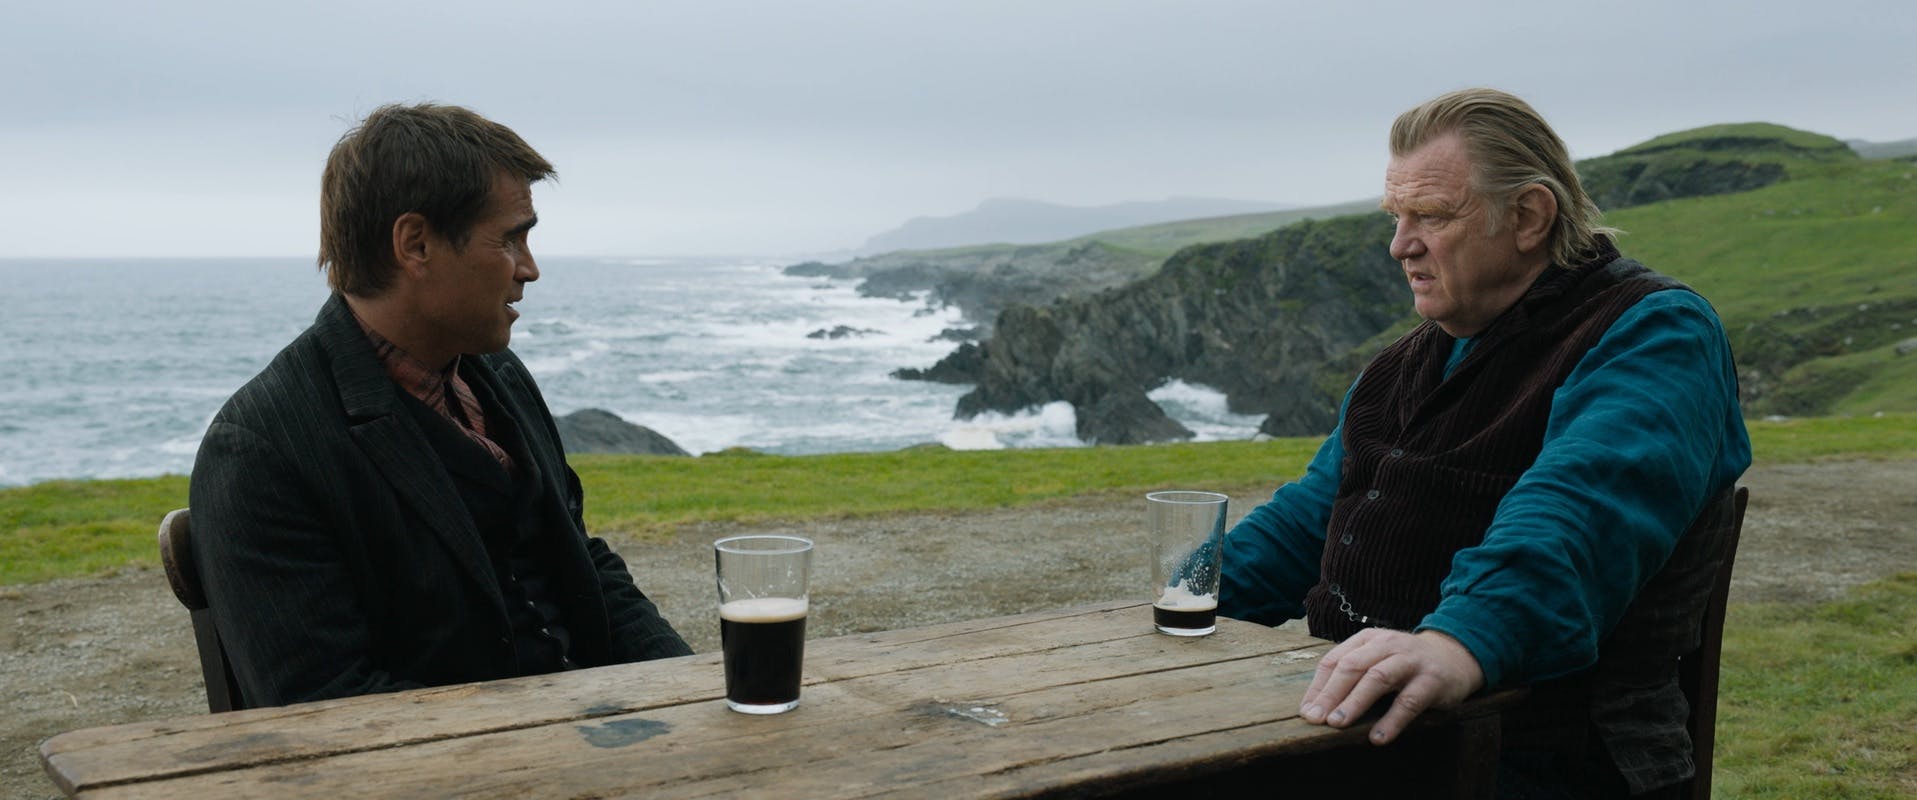 Colin Farrell and Brendan Gleeson in the film THE BANSHEES OF INISHERIN. Photo Courtesy of Searchlight Pictures. © 2023 Searchlight Pictures All Rights Reserved.